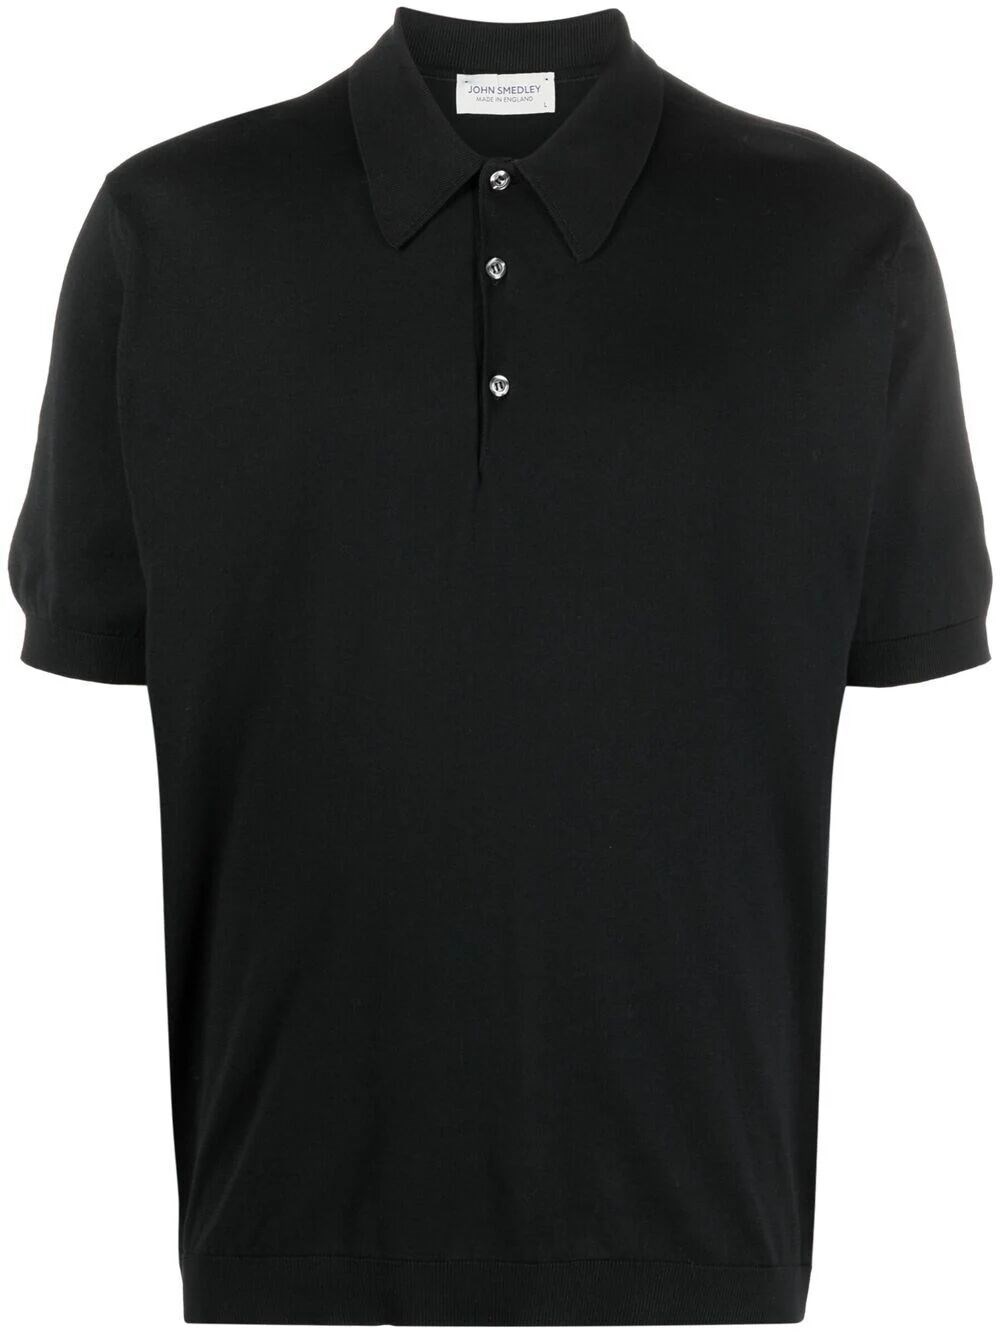 Shop John Smedley Knitted Cotton Polo Shirt In Black